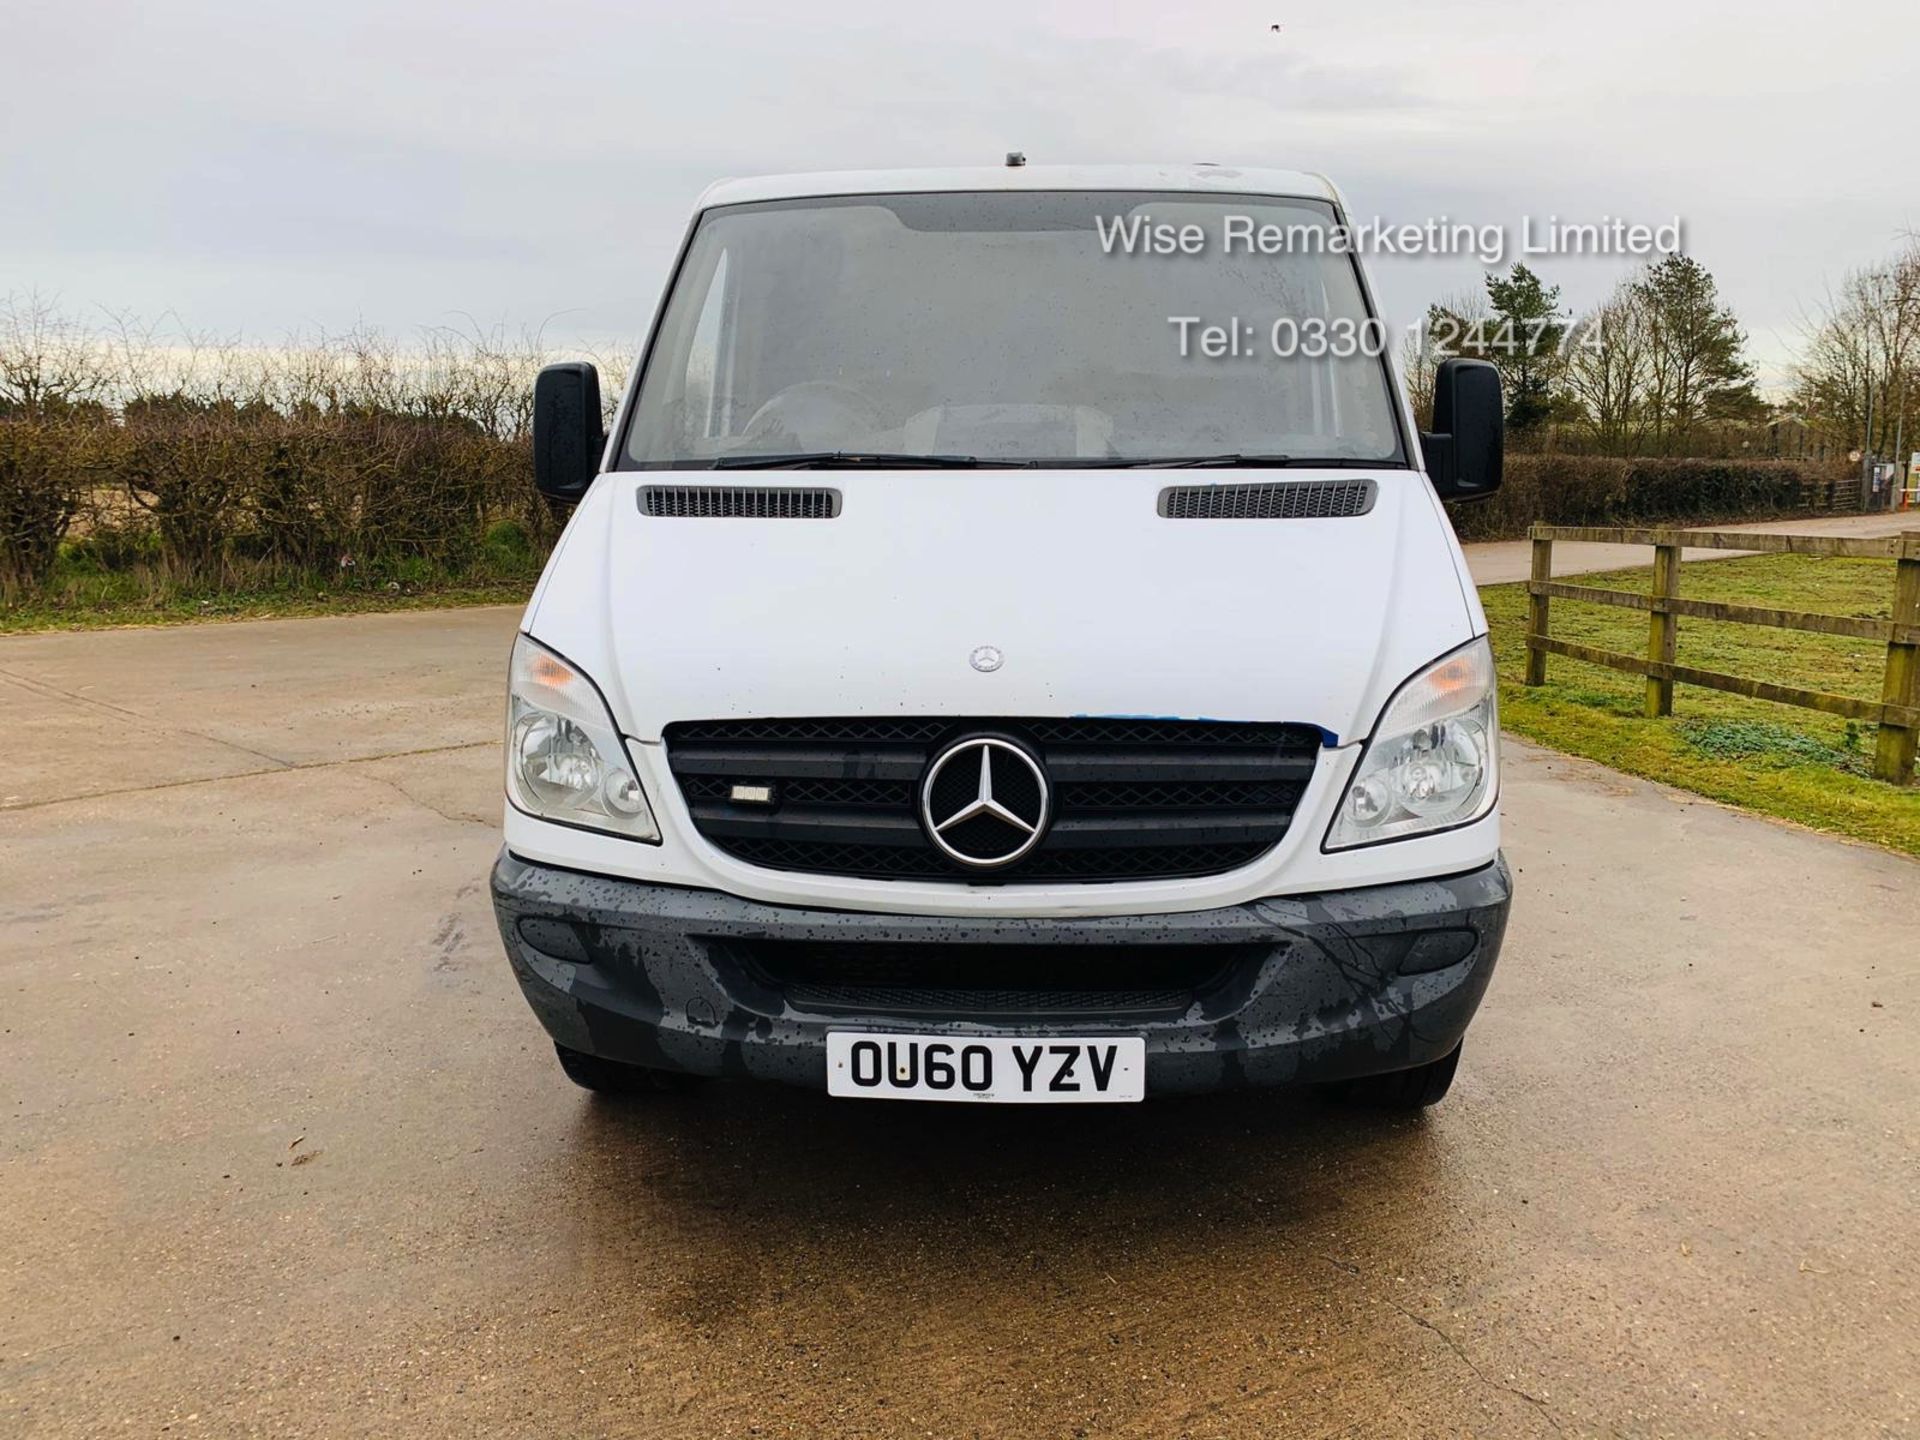 Mercedes Sprinter 313 2.1 CDI *Automatic Triptronic Gearbox* - 2011 Model - Ply Lined - Image 3 of 15